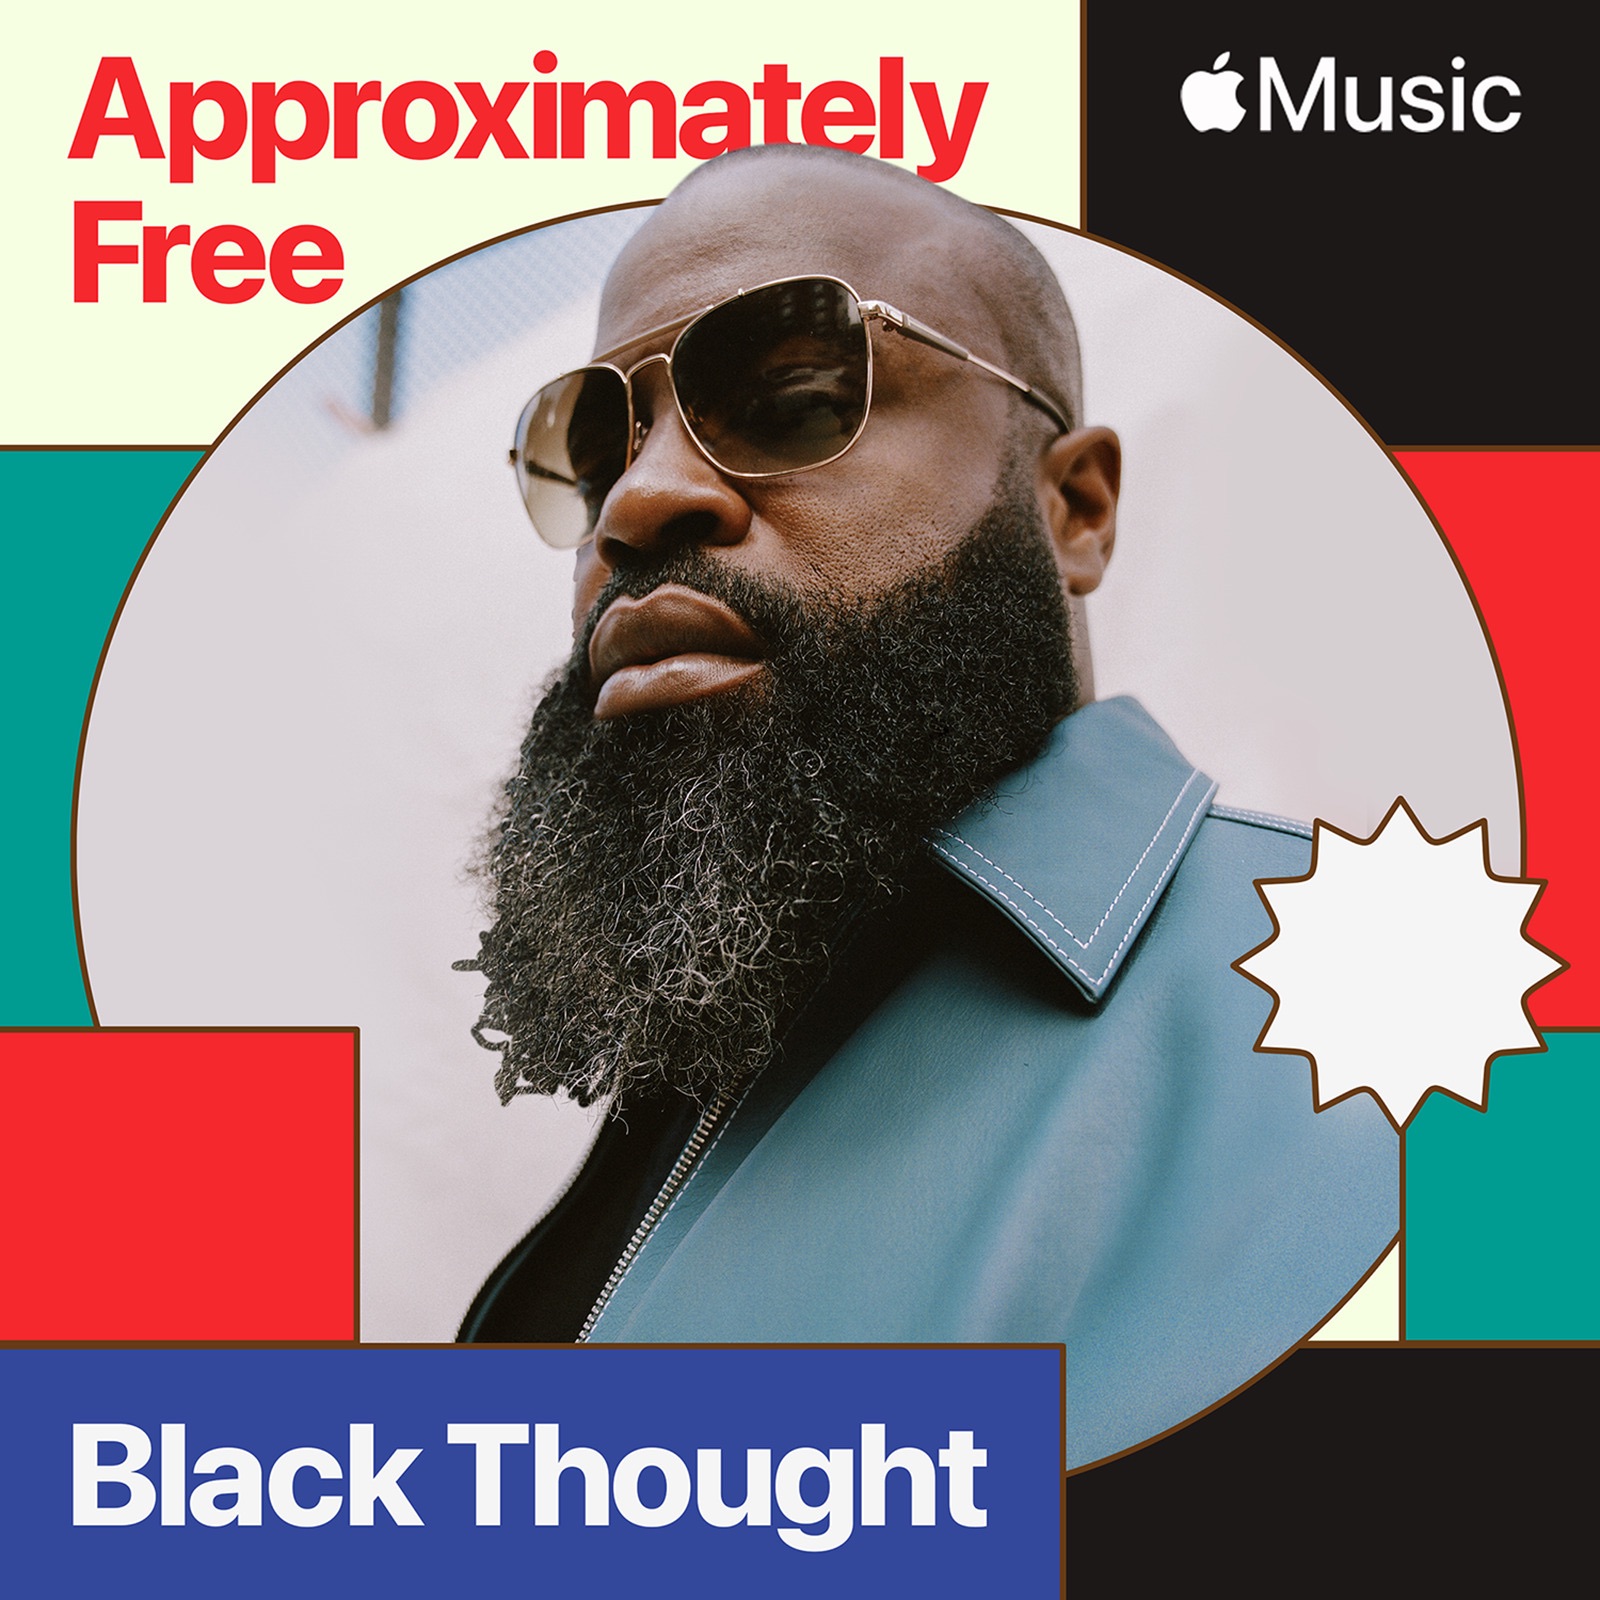 Black Thought - Approximately Free (feat. Shavona Antoinette & Ray Angry) - Single